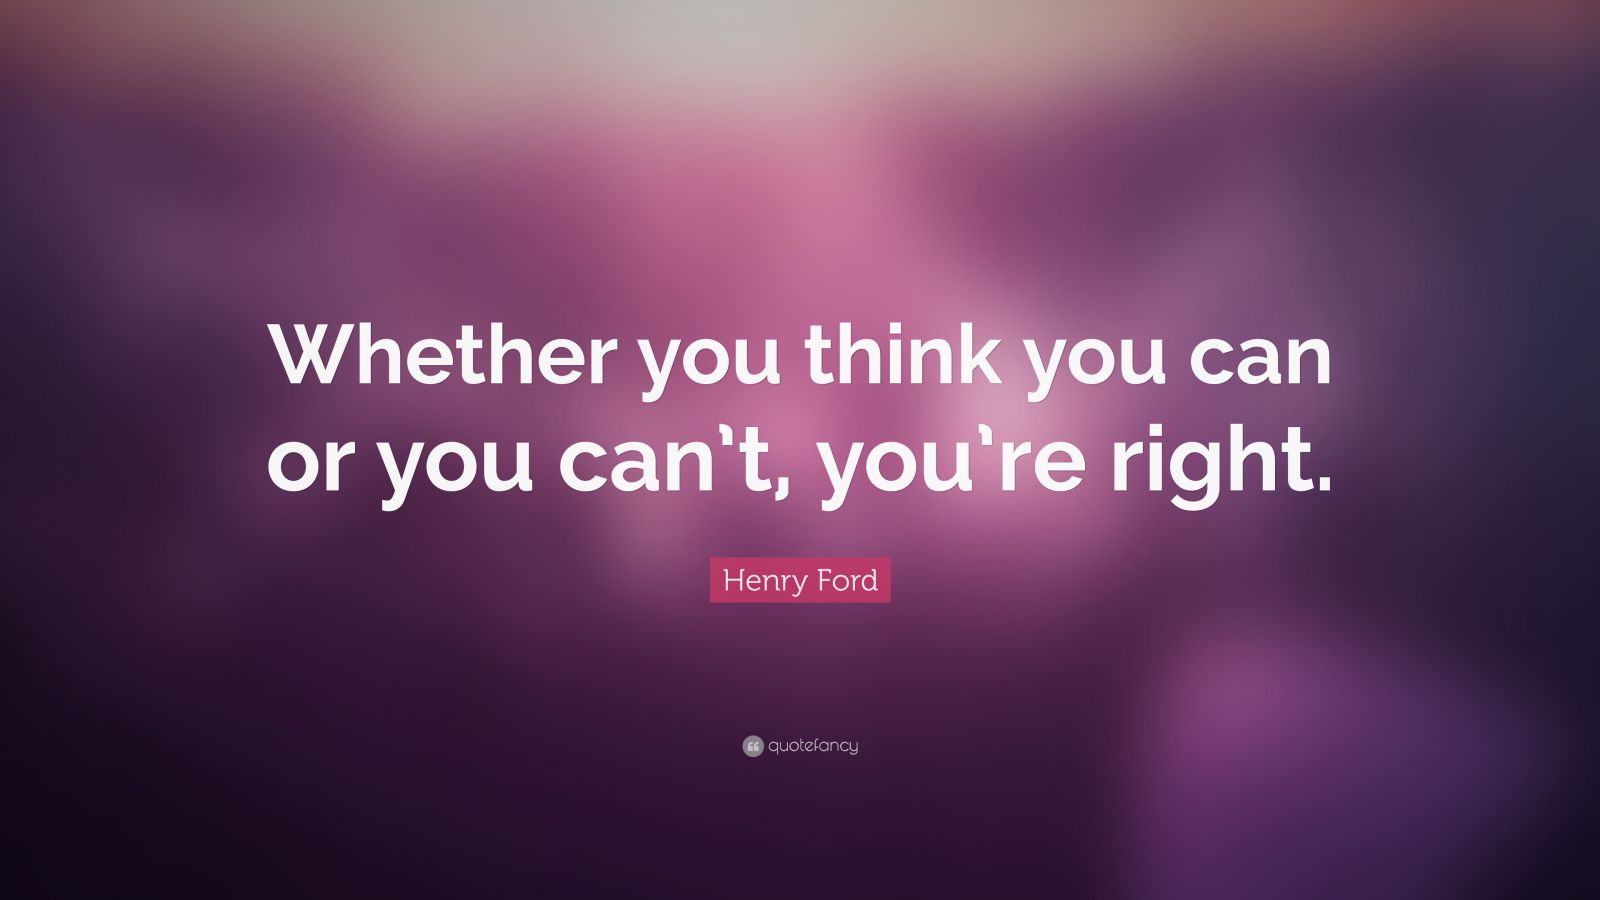 Henry Ford Quote: “Whether you think you can or you can’t, you’re right